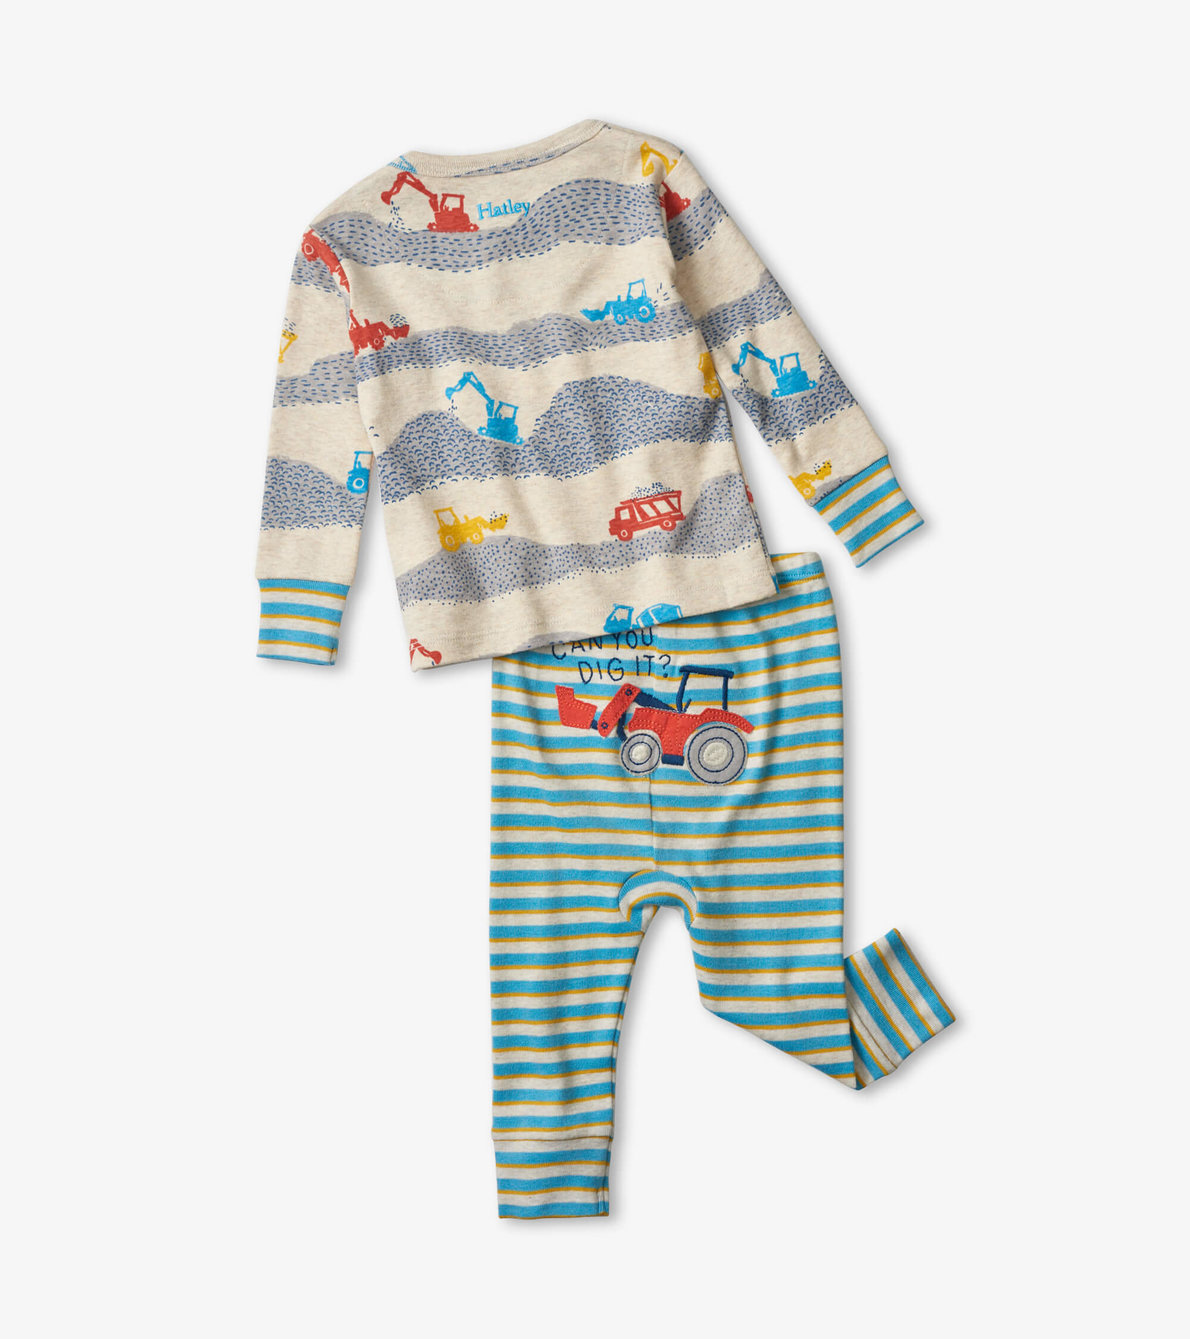 View larger image of Construction Site Organic Cotton Baby Pajama Set